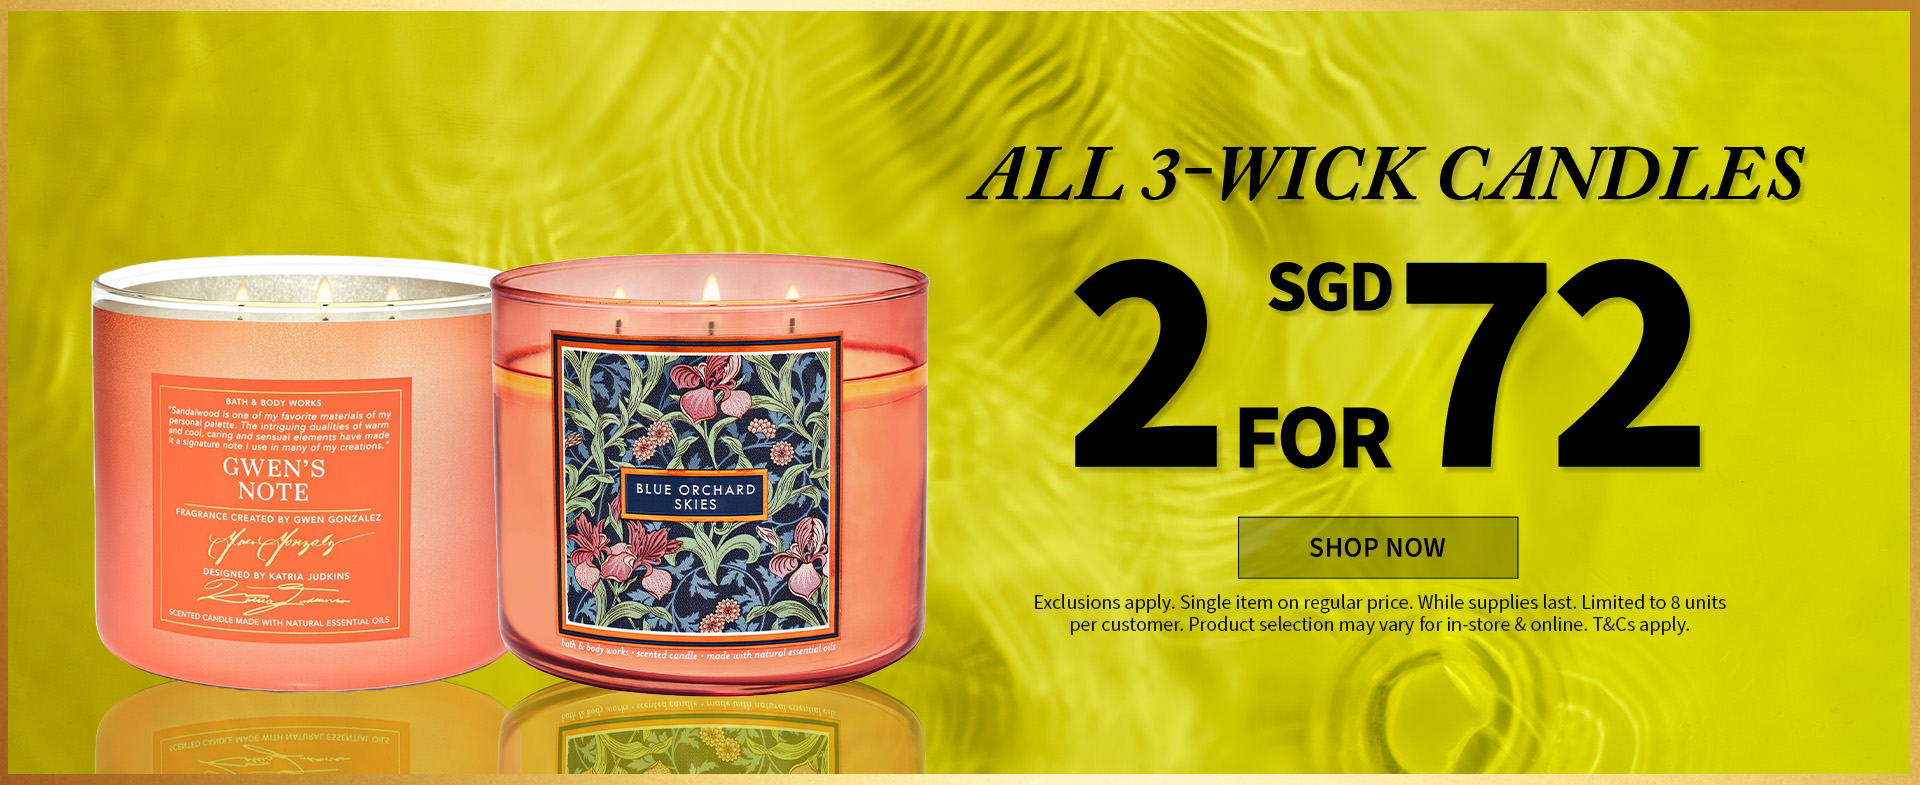 3 wick candle promo